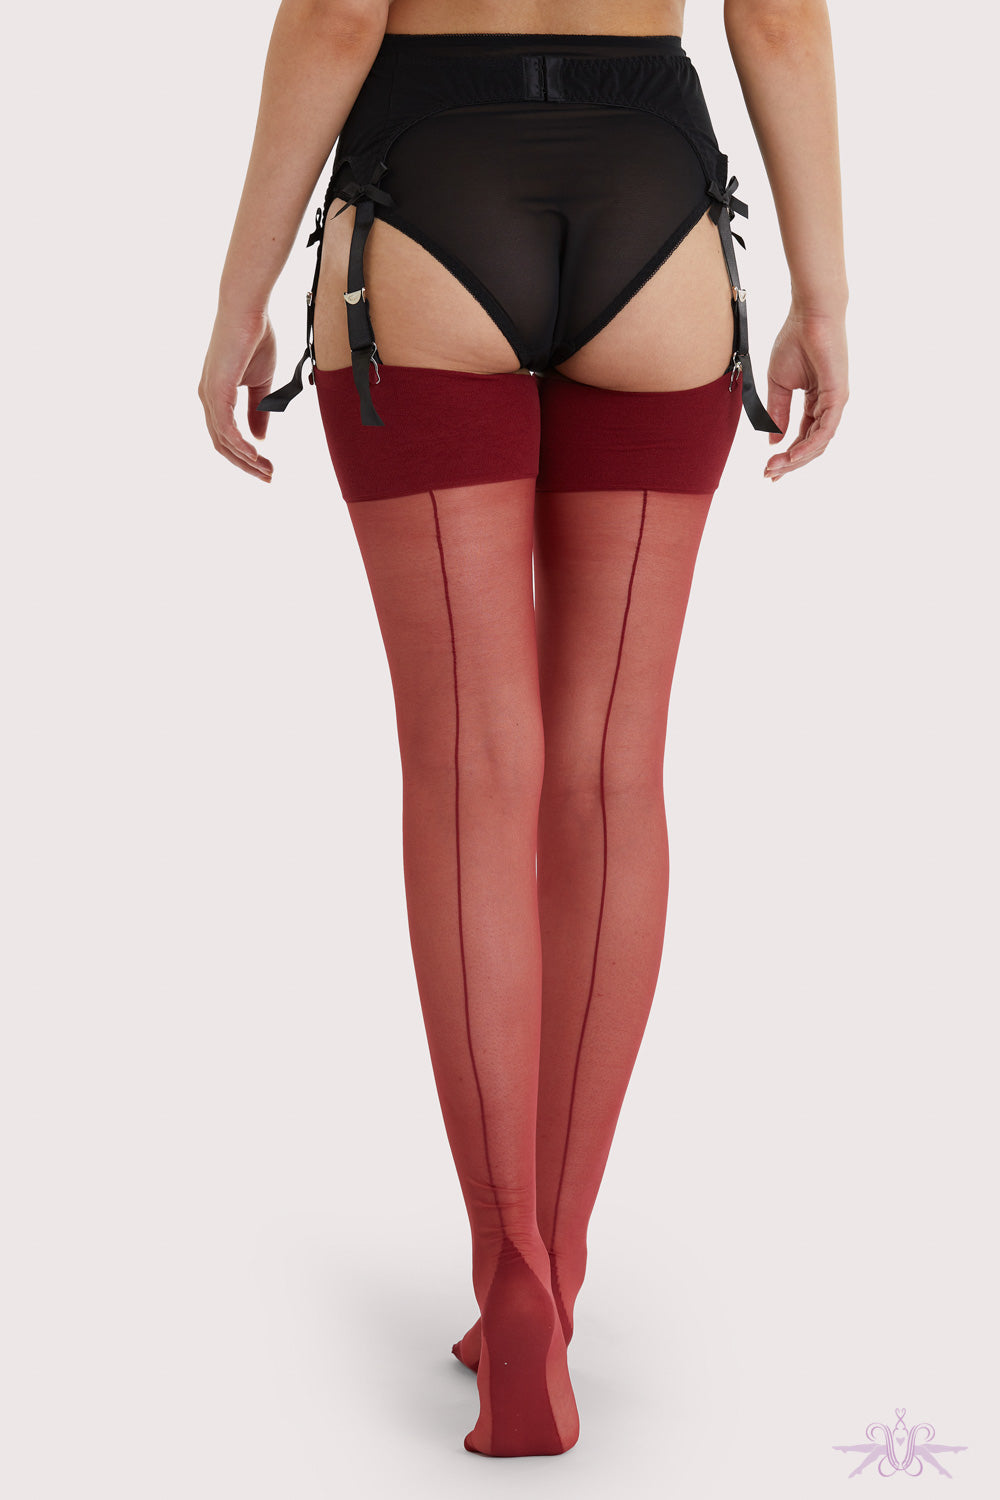 Maison Close Tapage Nocturne Red Quarter Cup Bra - Mayfair Stockings